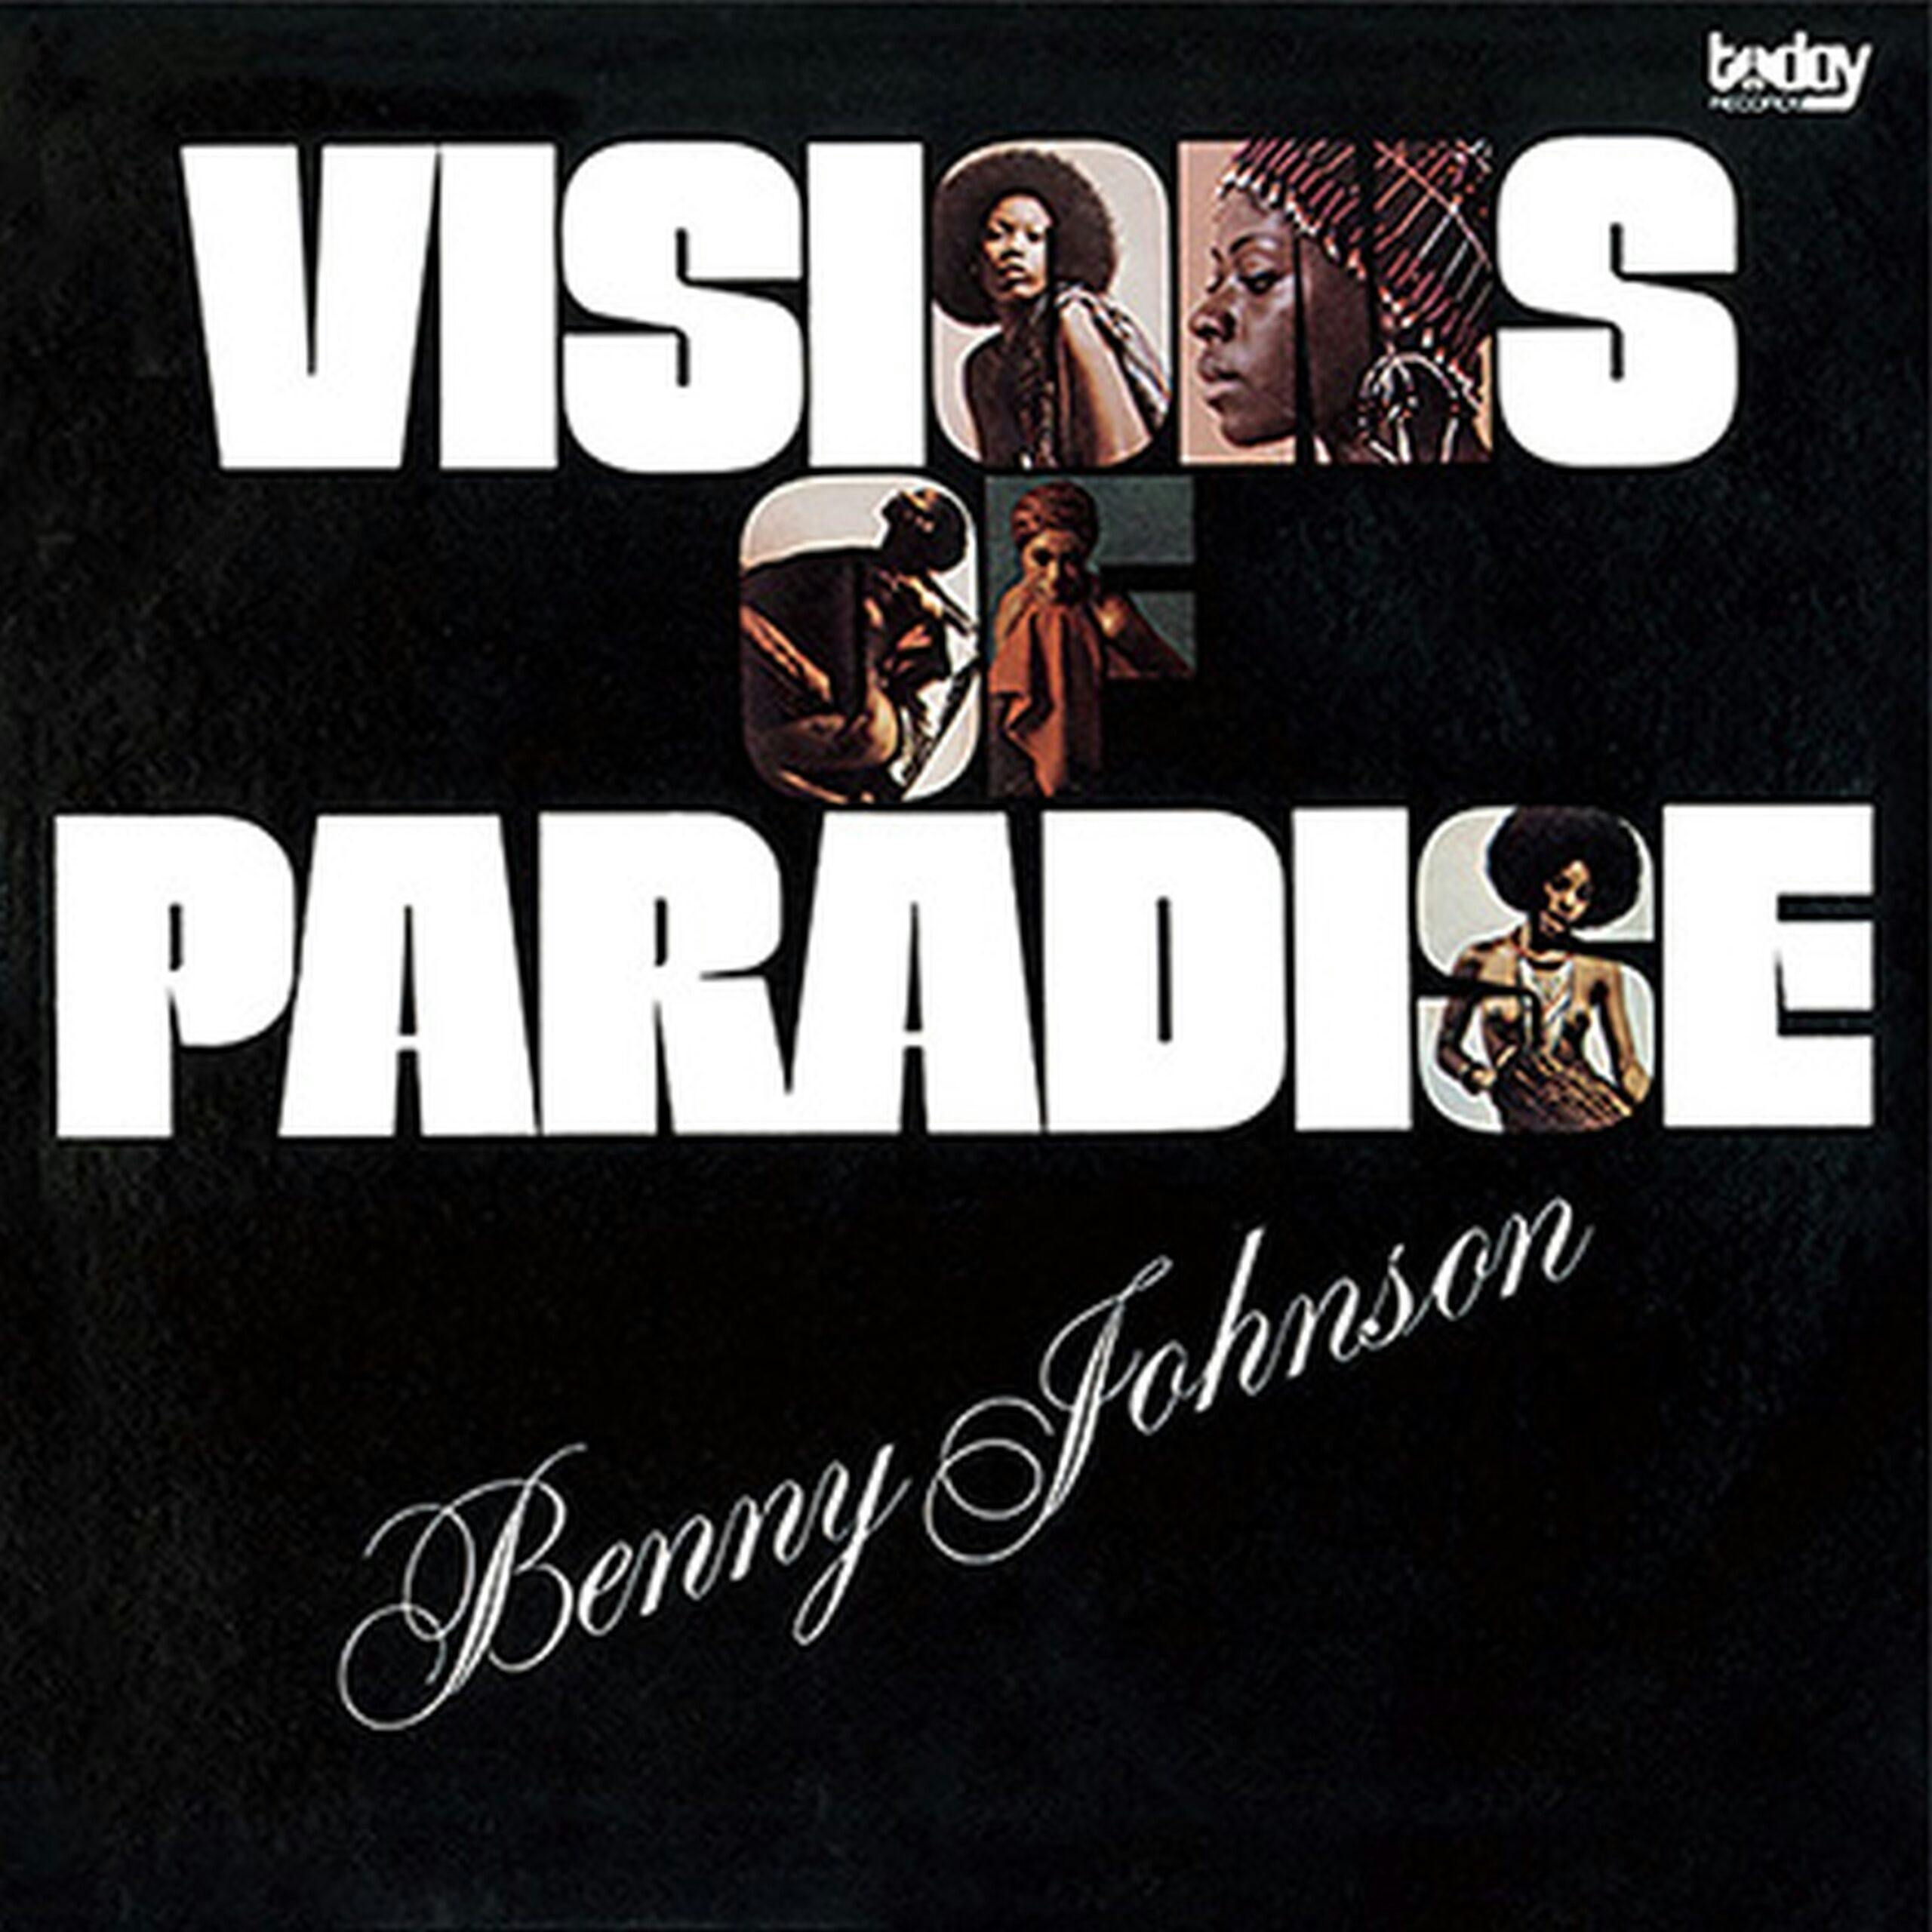 Released in 1973 on the Patrick Adams' Perception Records subsidiary label Today, Visions of Paradise is a remarkable soul and RnB album that puts the voice of former member of The Spoilers front and centre. Benny Johnson's voice has been described as 'gutsy' and on a par with Johnnie Taylor, Syl Johnson and the maestro, the Reverend Al Green.